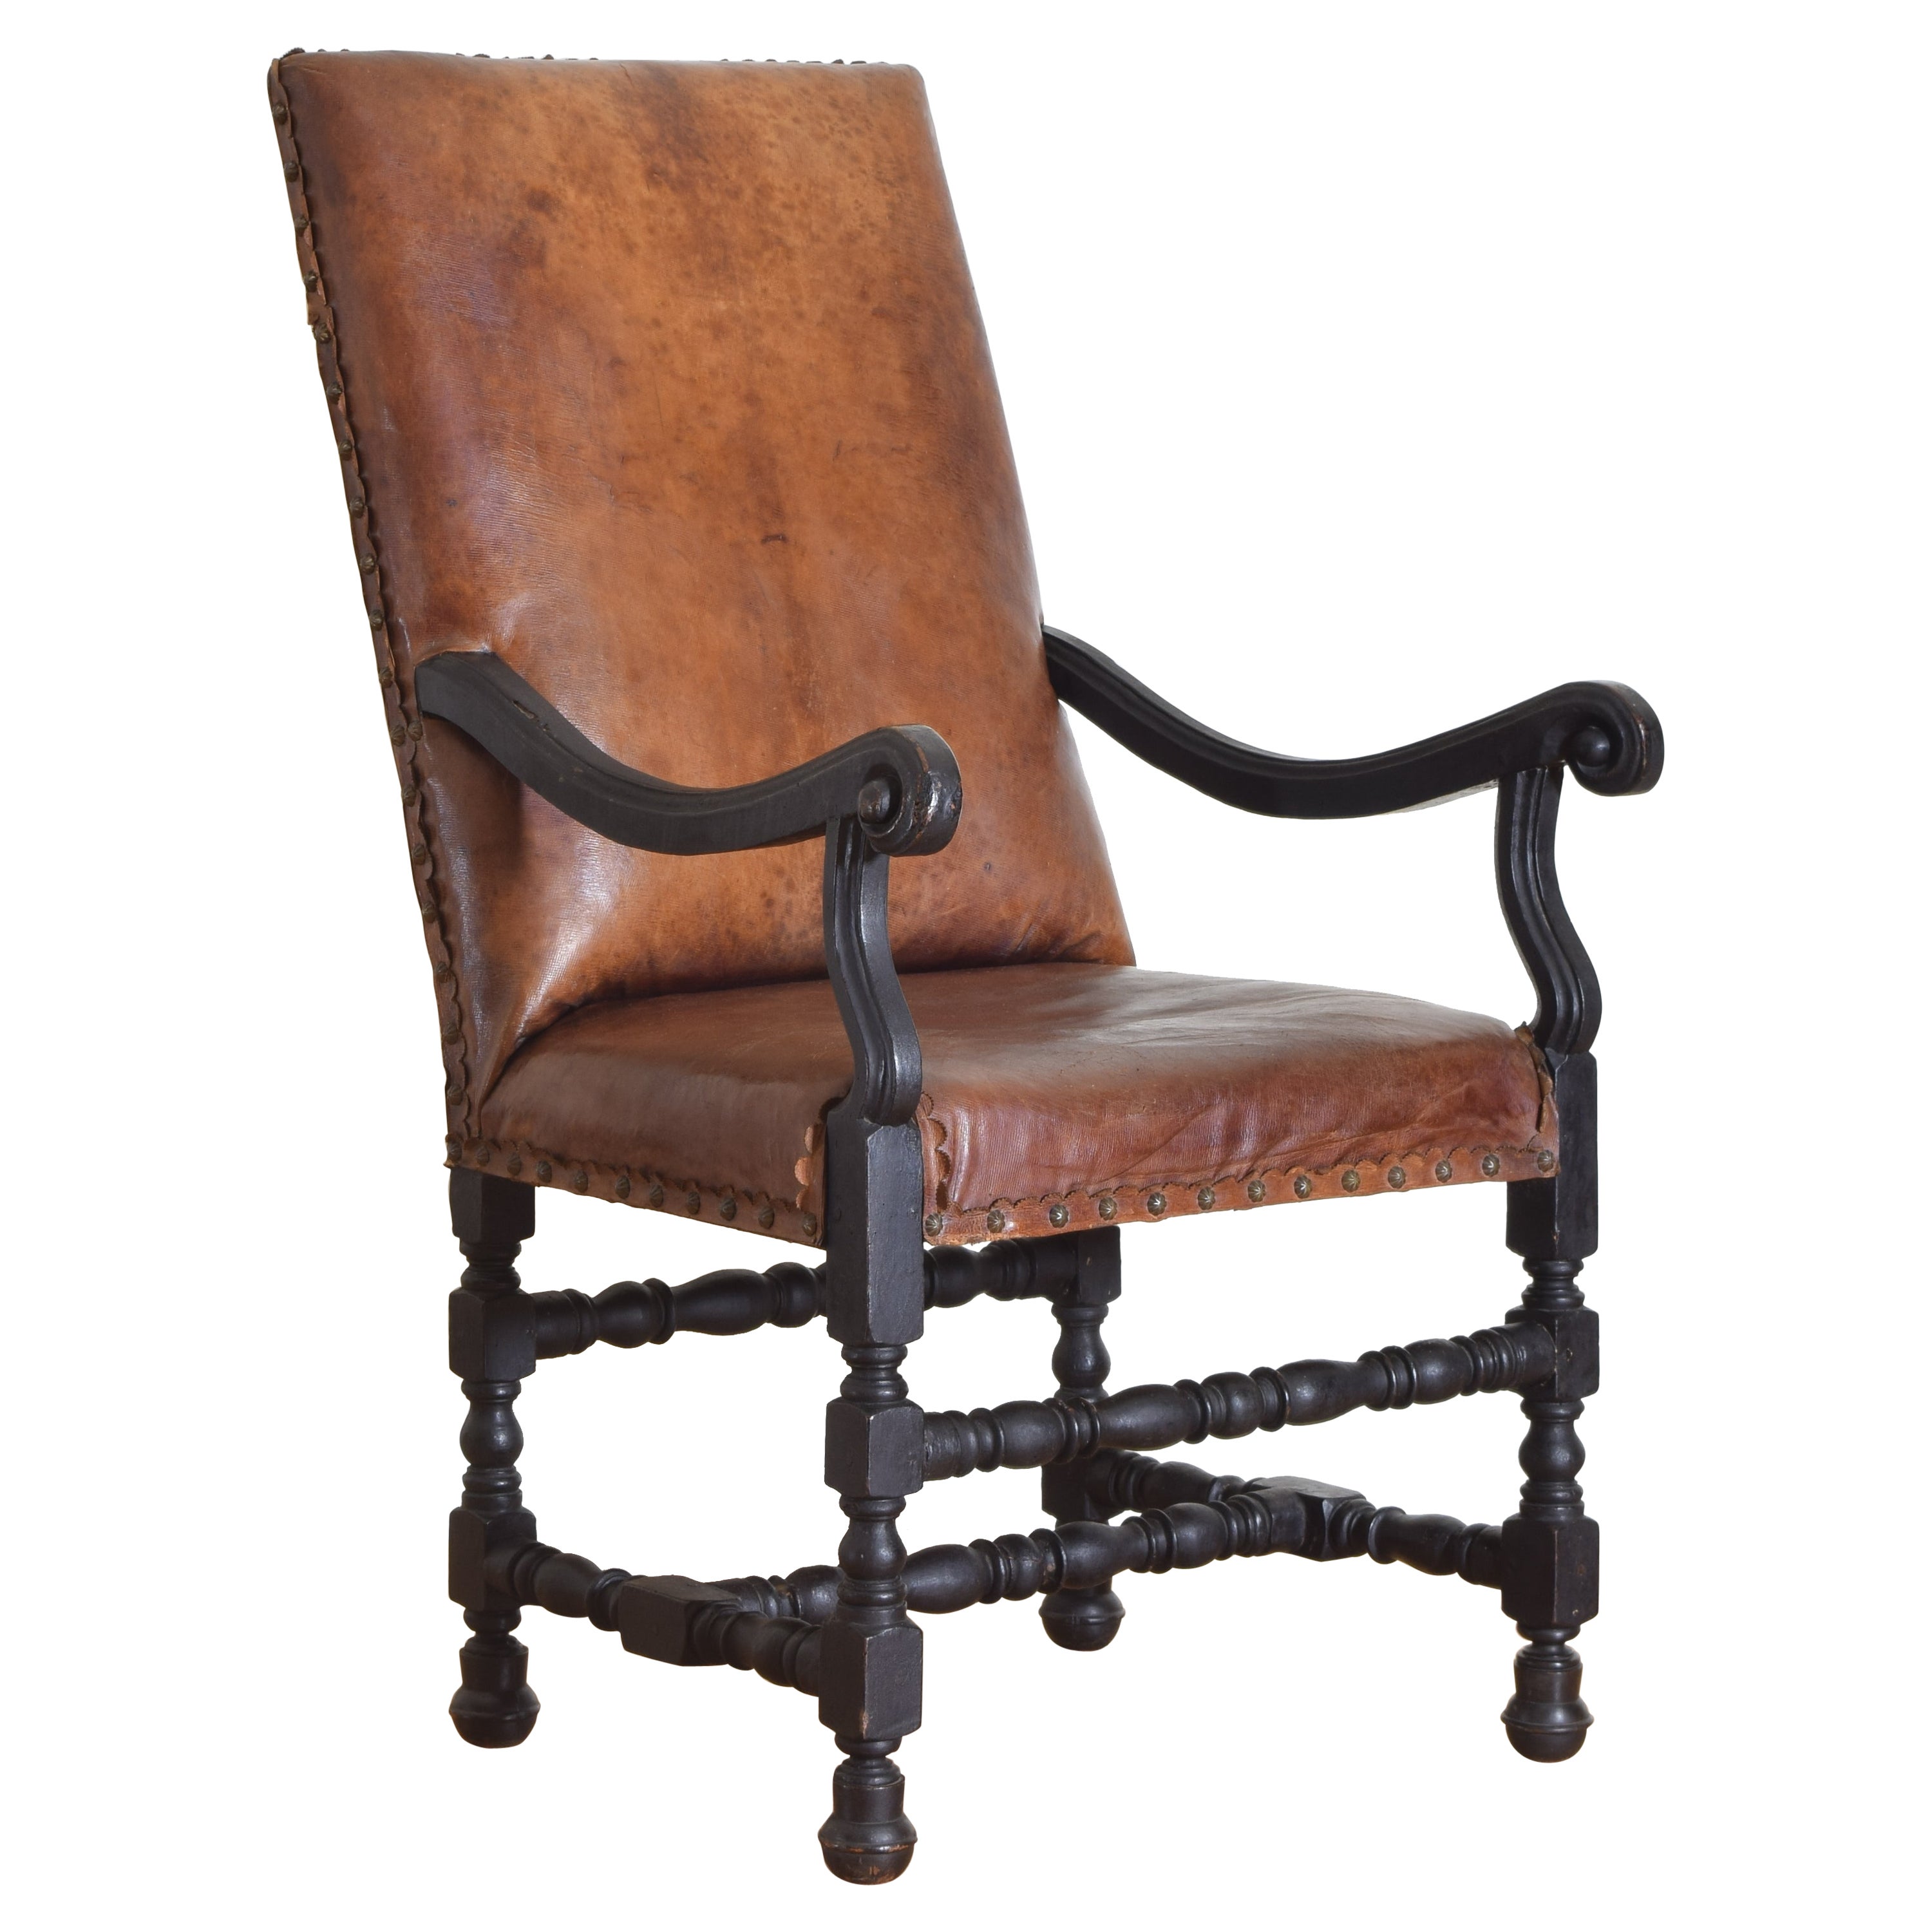 Italian Louis XIV Period Ebonized Walnut & Leather Upholstered Armchair, 18thc For Sale